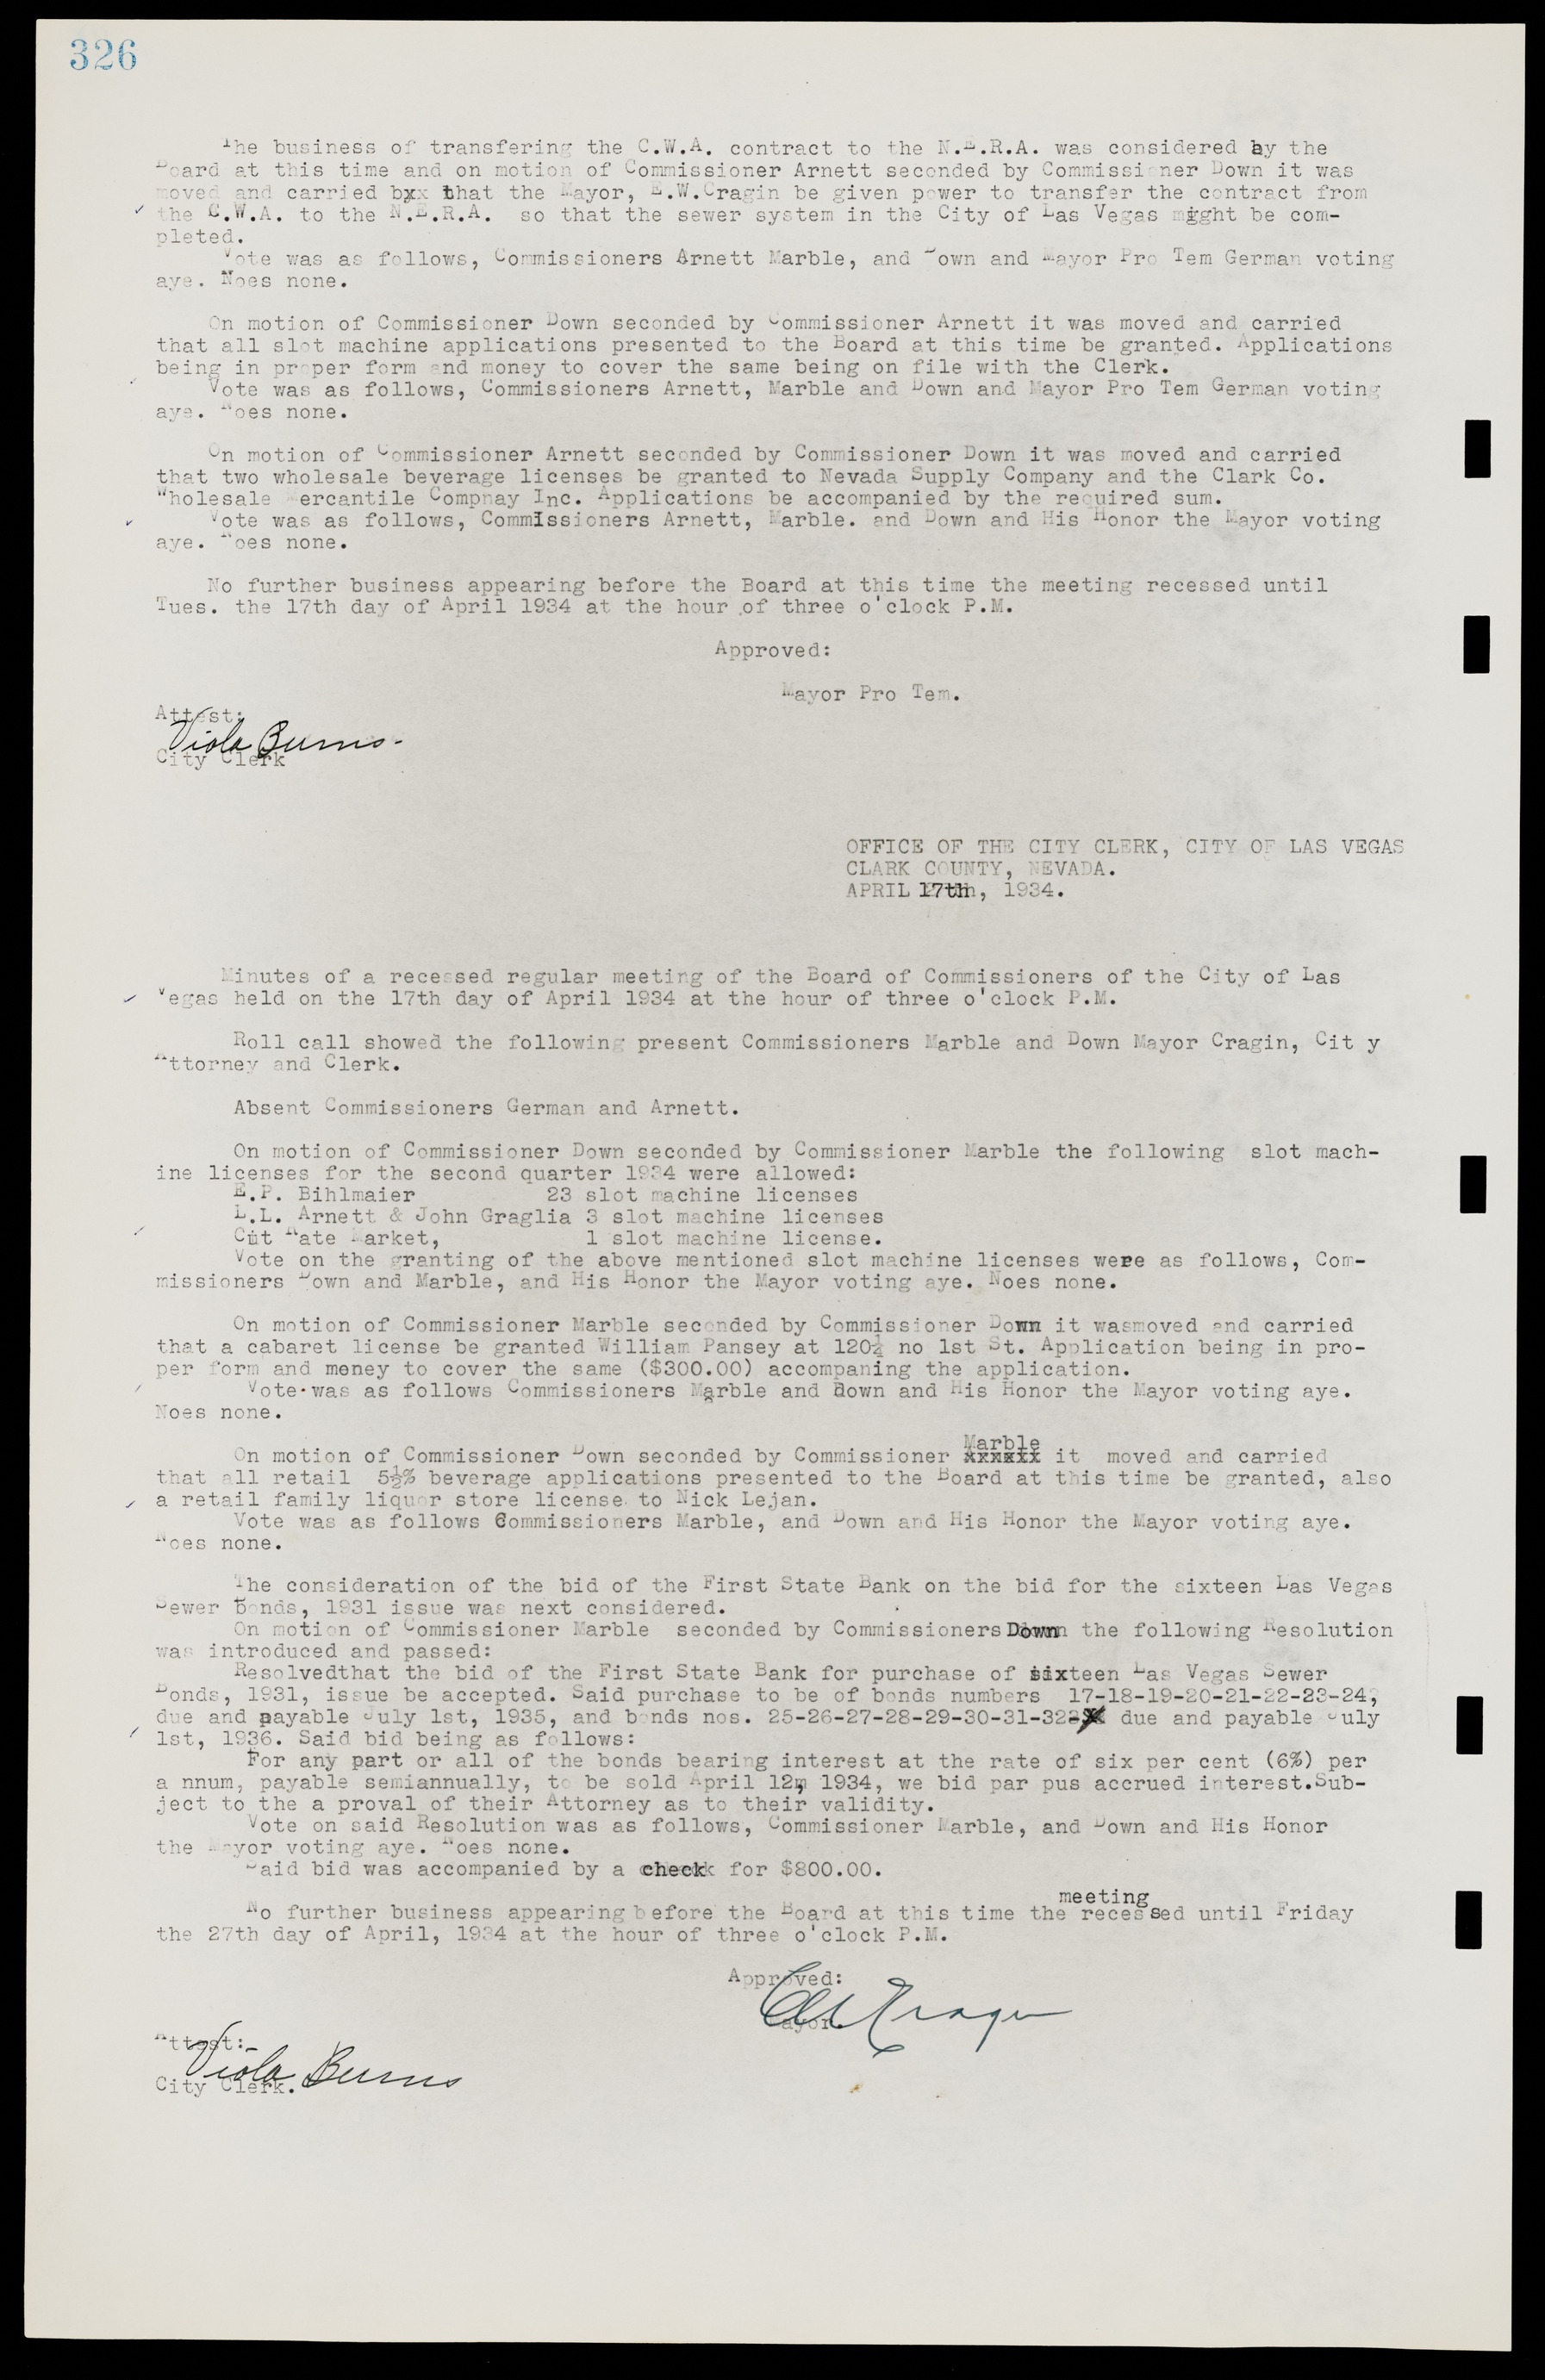 Las Vegas City Commission Minutes, May 14, 1929 to February 11, 1937, lvc000003-333